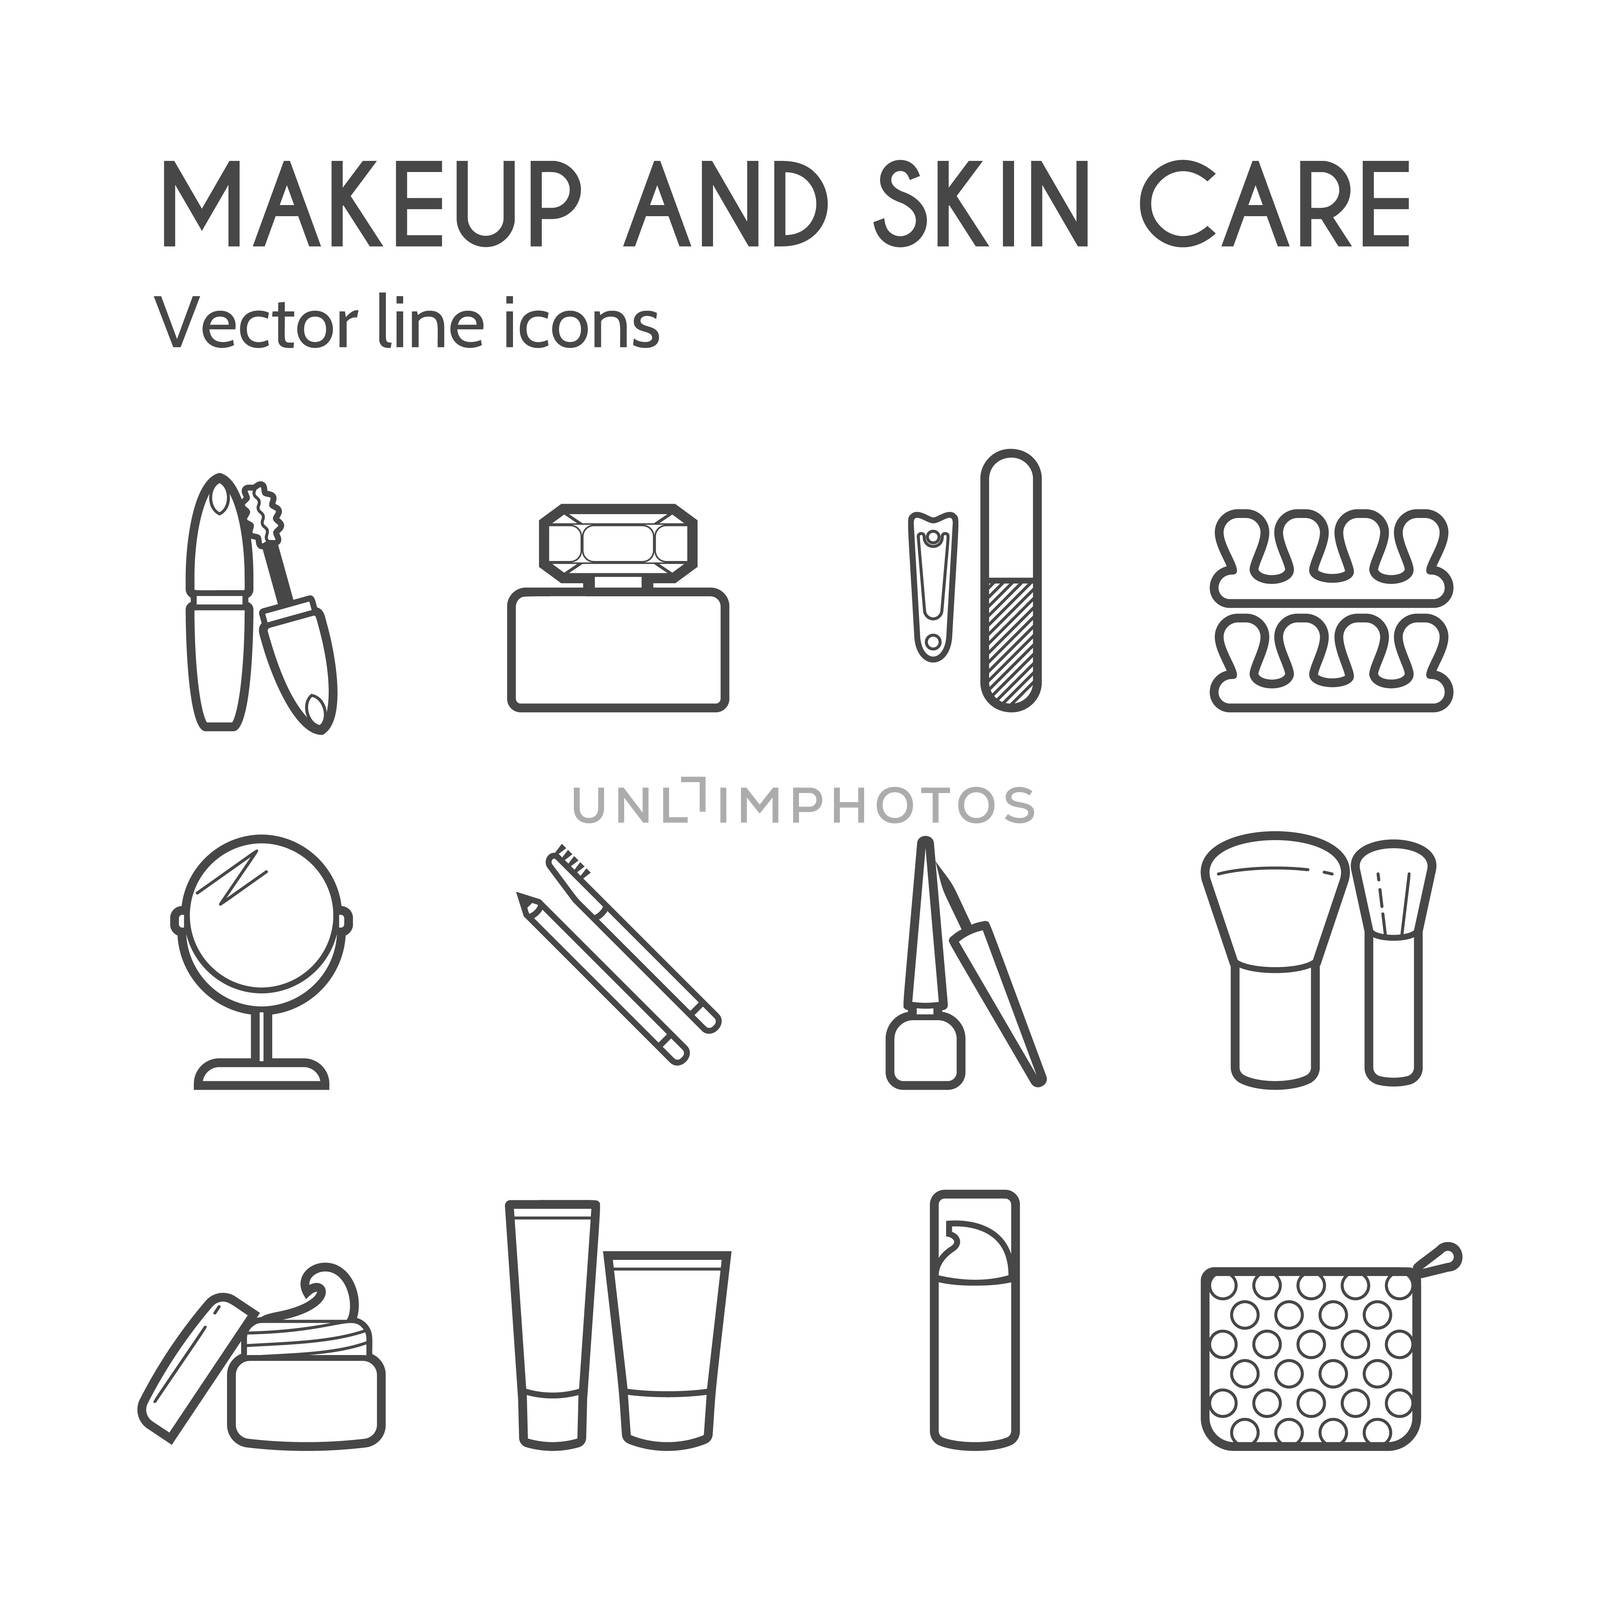  cosmetic icons. Mascara, brush, perfume, cream and other make-up items. Makeup thin linear signs for manicure, pedicure and Visage. by Elena_Garder